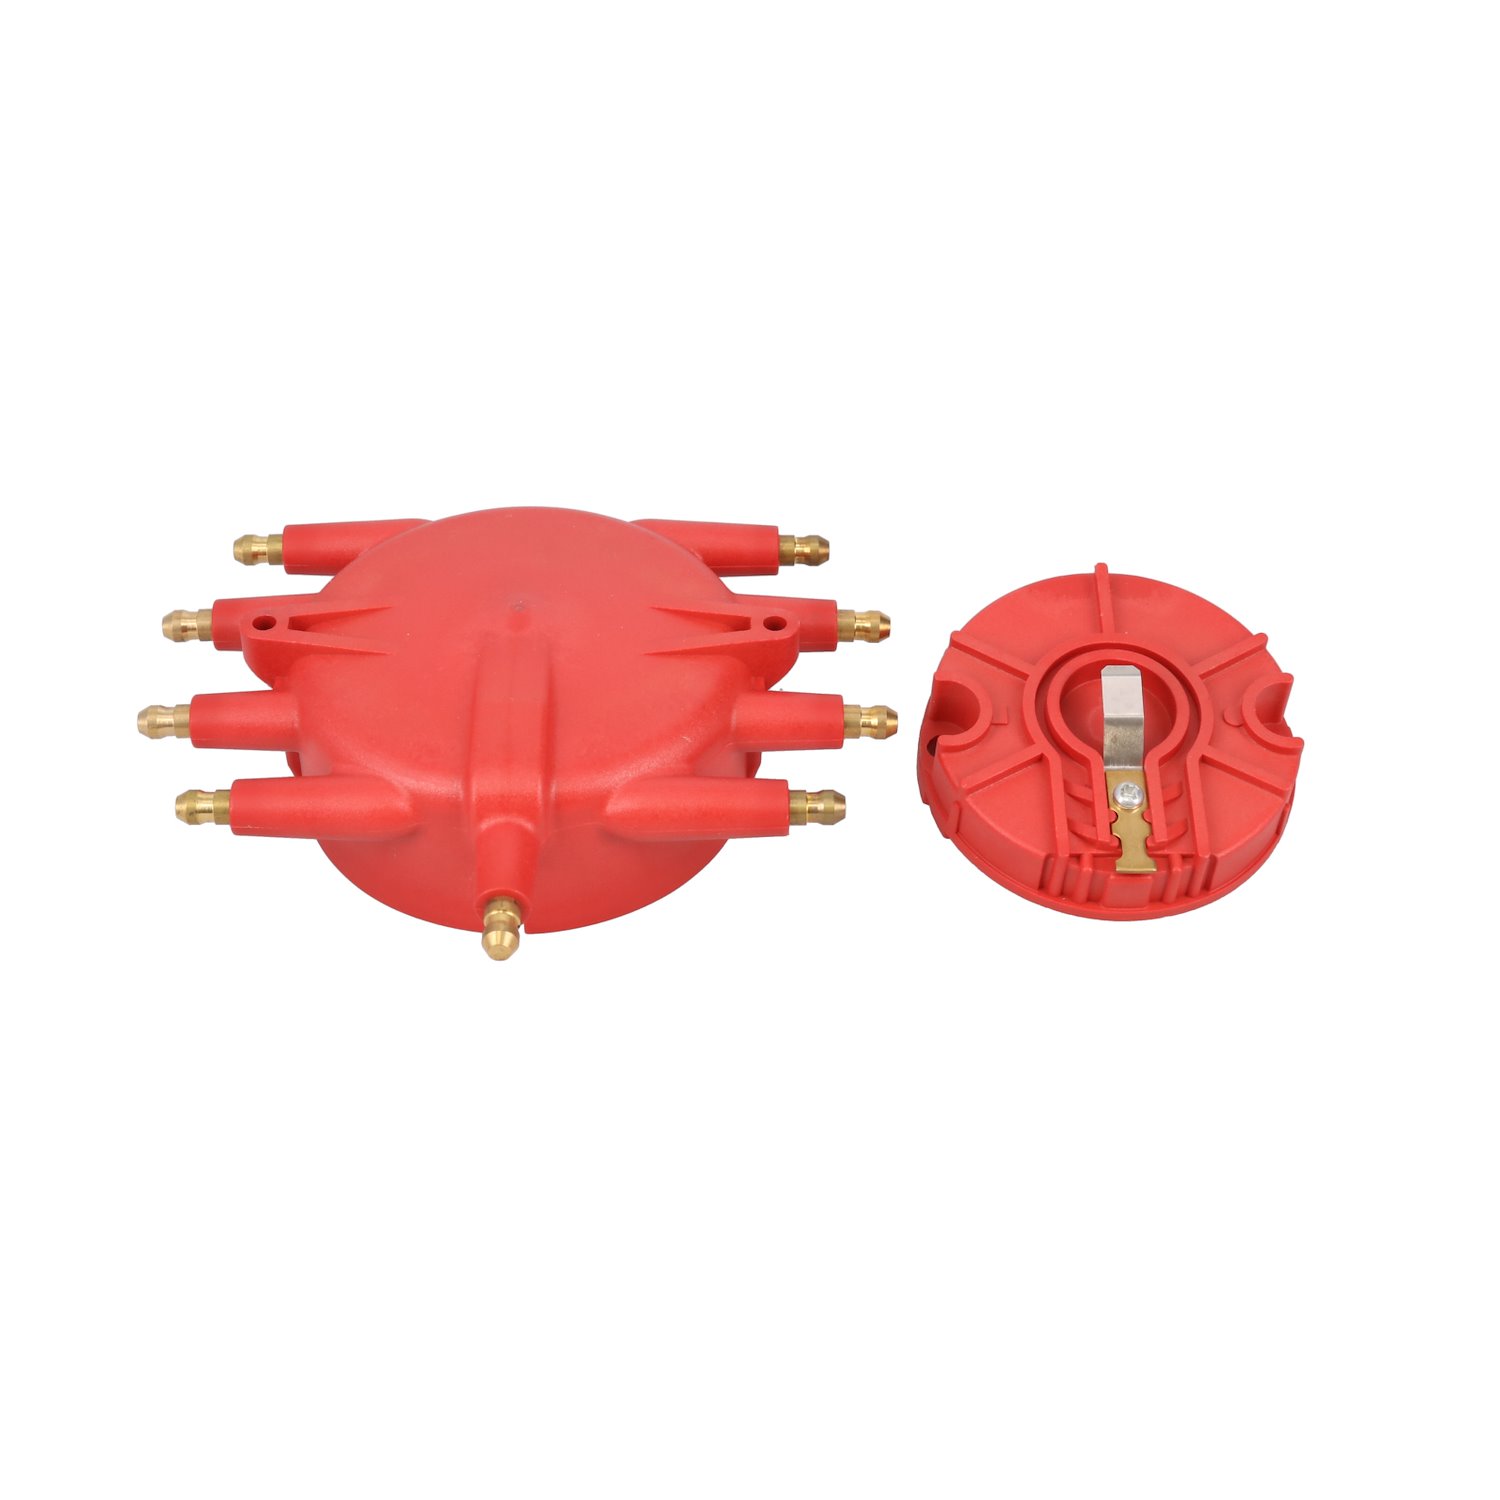 JM6988R Pro-Series Distributor Crab Cap and Rotor Kit, 8 Cylinder Male, Red